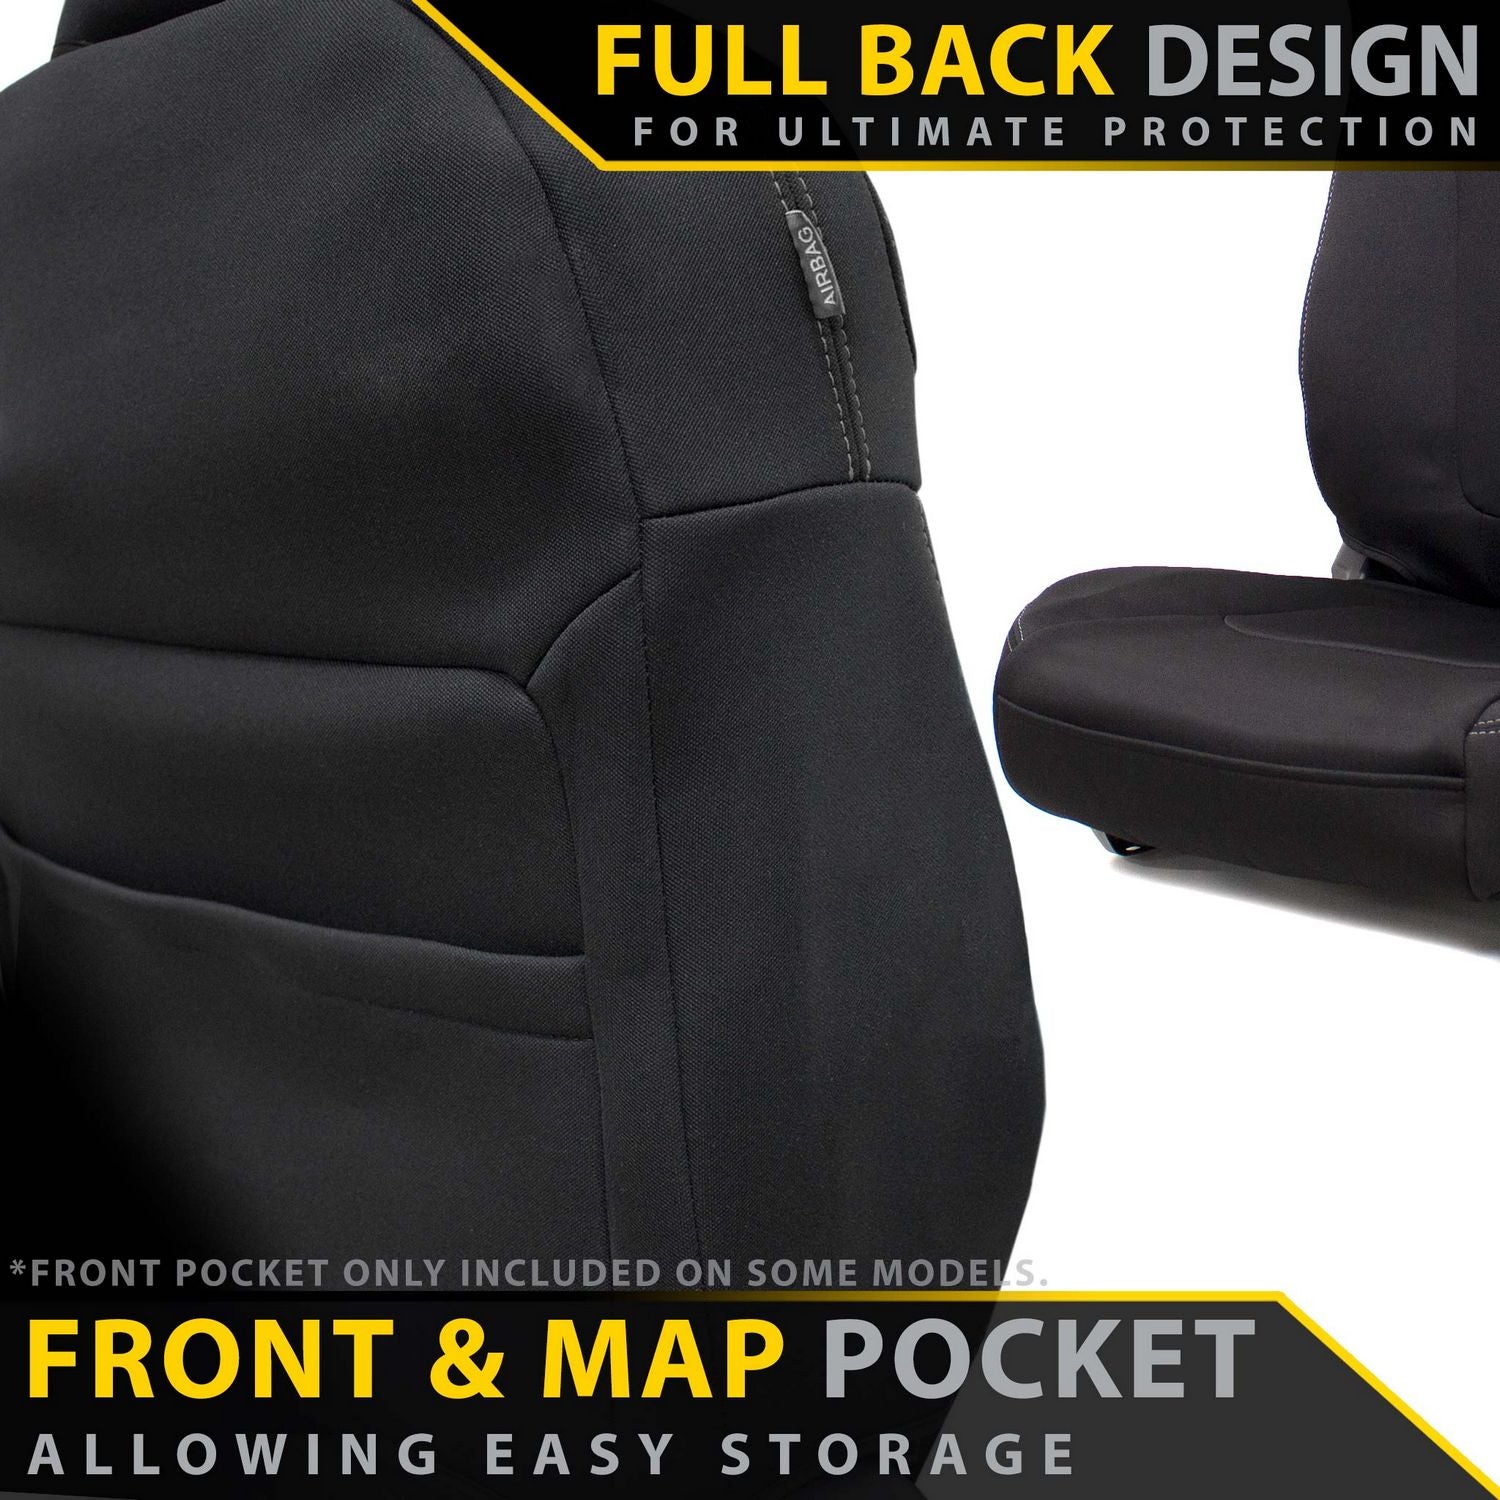 Toyota Landcruiser 200 Series GX/GXL Neoprene 2x Front Seat Covers (Available)